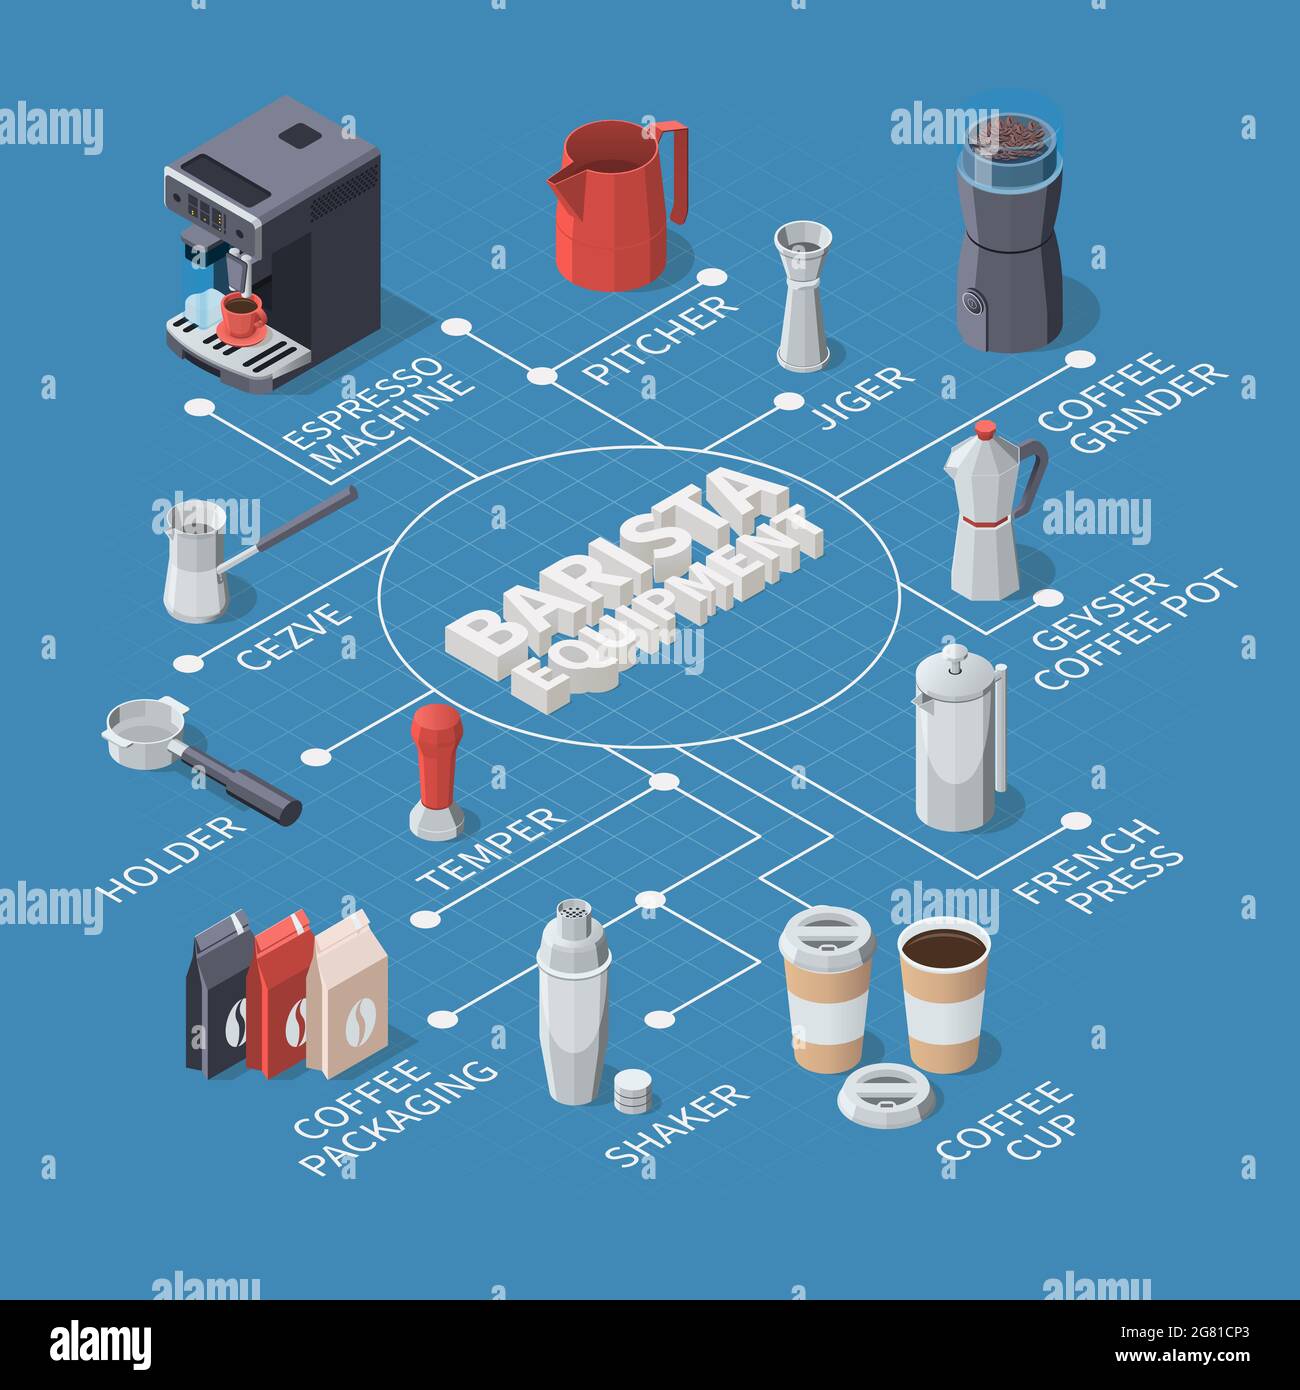 https://c8.alamy.com/comp/2G81CP3/professional-barista-coffee-equipment-isometric-flowchart-composition-with-isolated-images-of-coffee-making-utensils-and-text-vector-illustration-2G81CP3.jpg